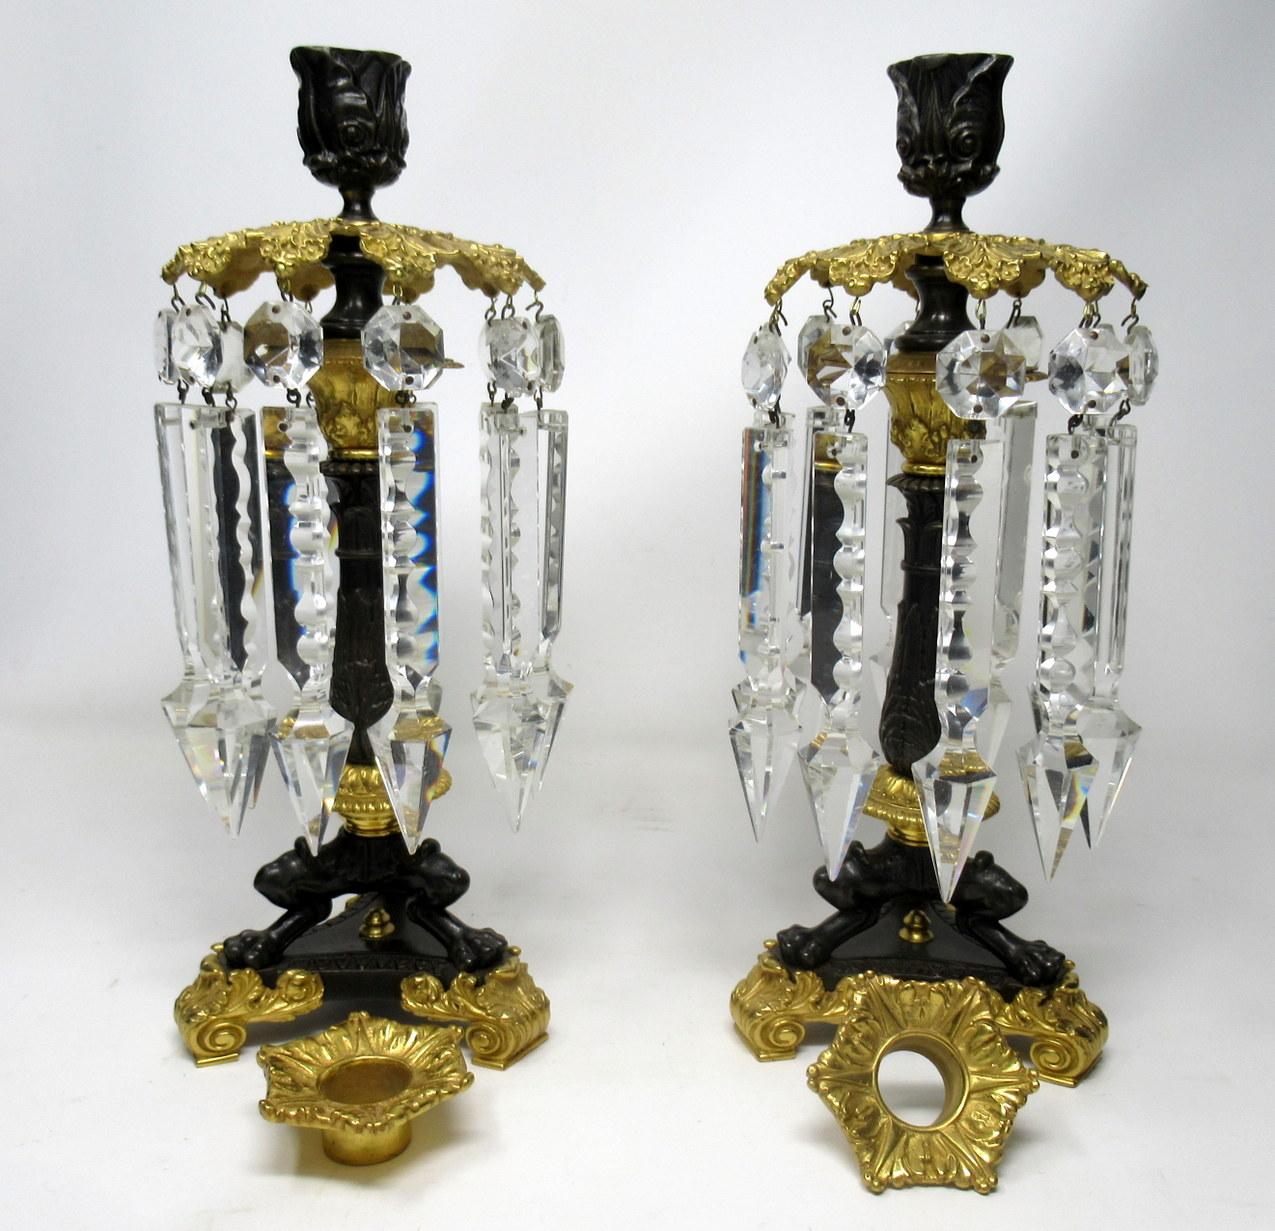 A very substantial and large pair of continental, possibly French cut crystal, ormolu and bronze single light heavy gauge candlesticks - lusters, first half of the 19th century. 

Each with an Acanthus Leaf ormolu canopy with ten hand facet-cut